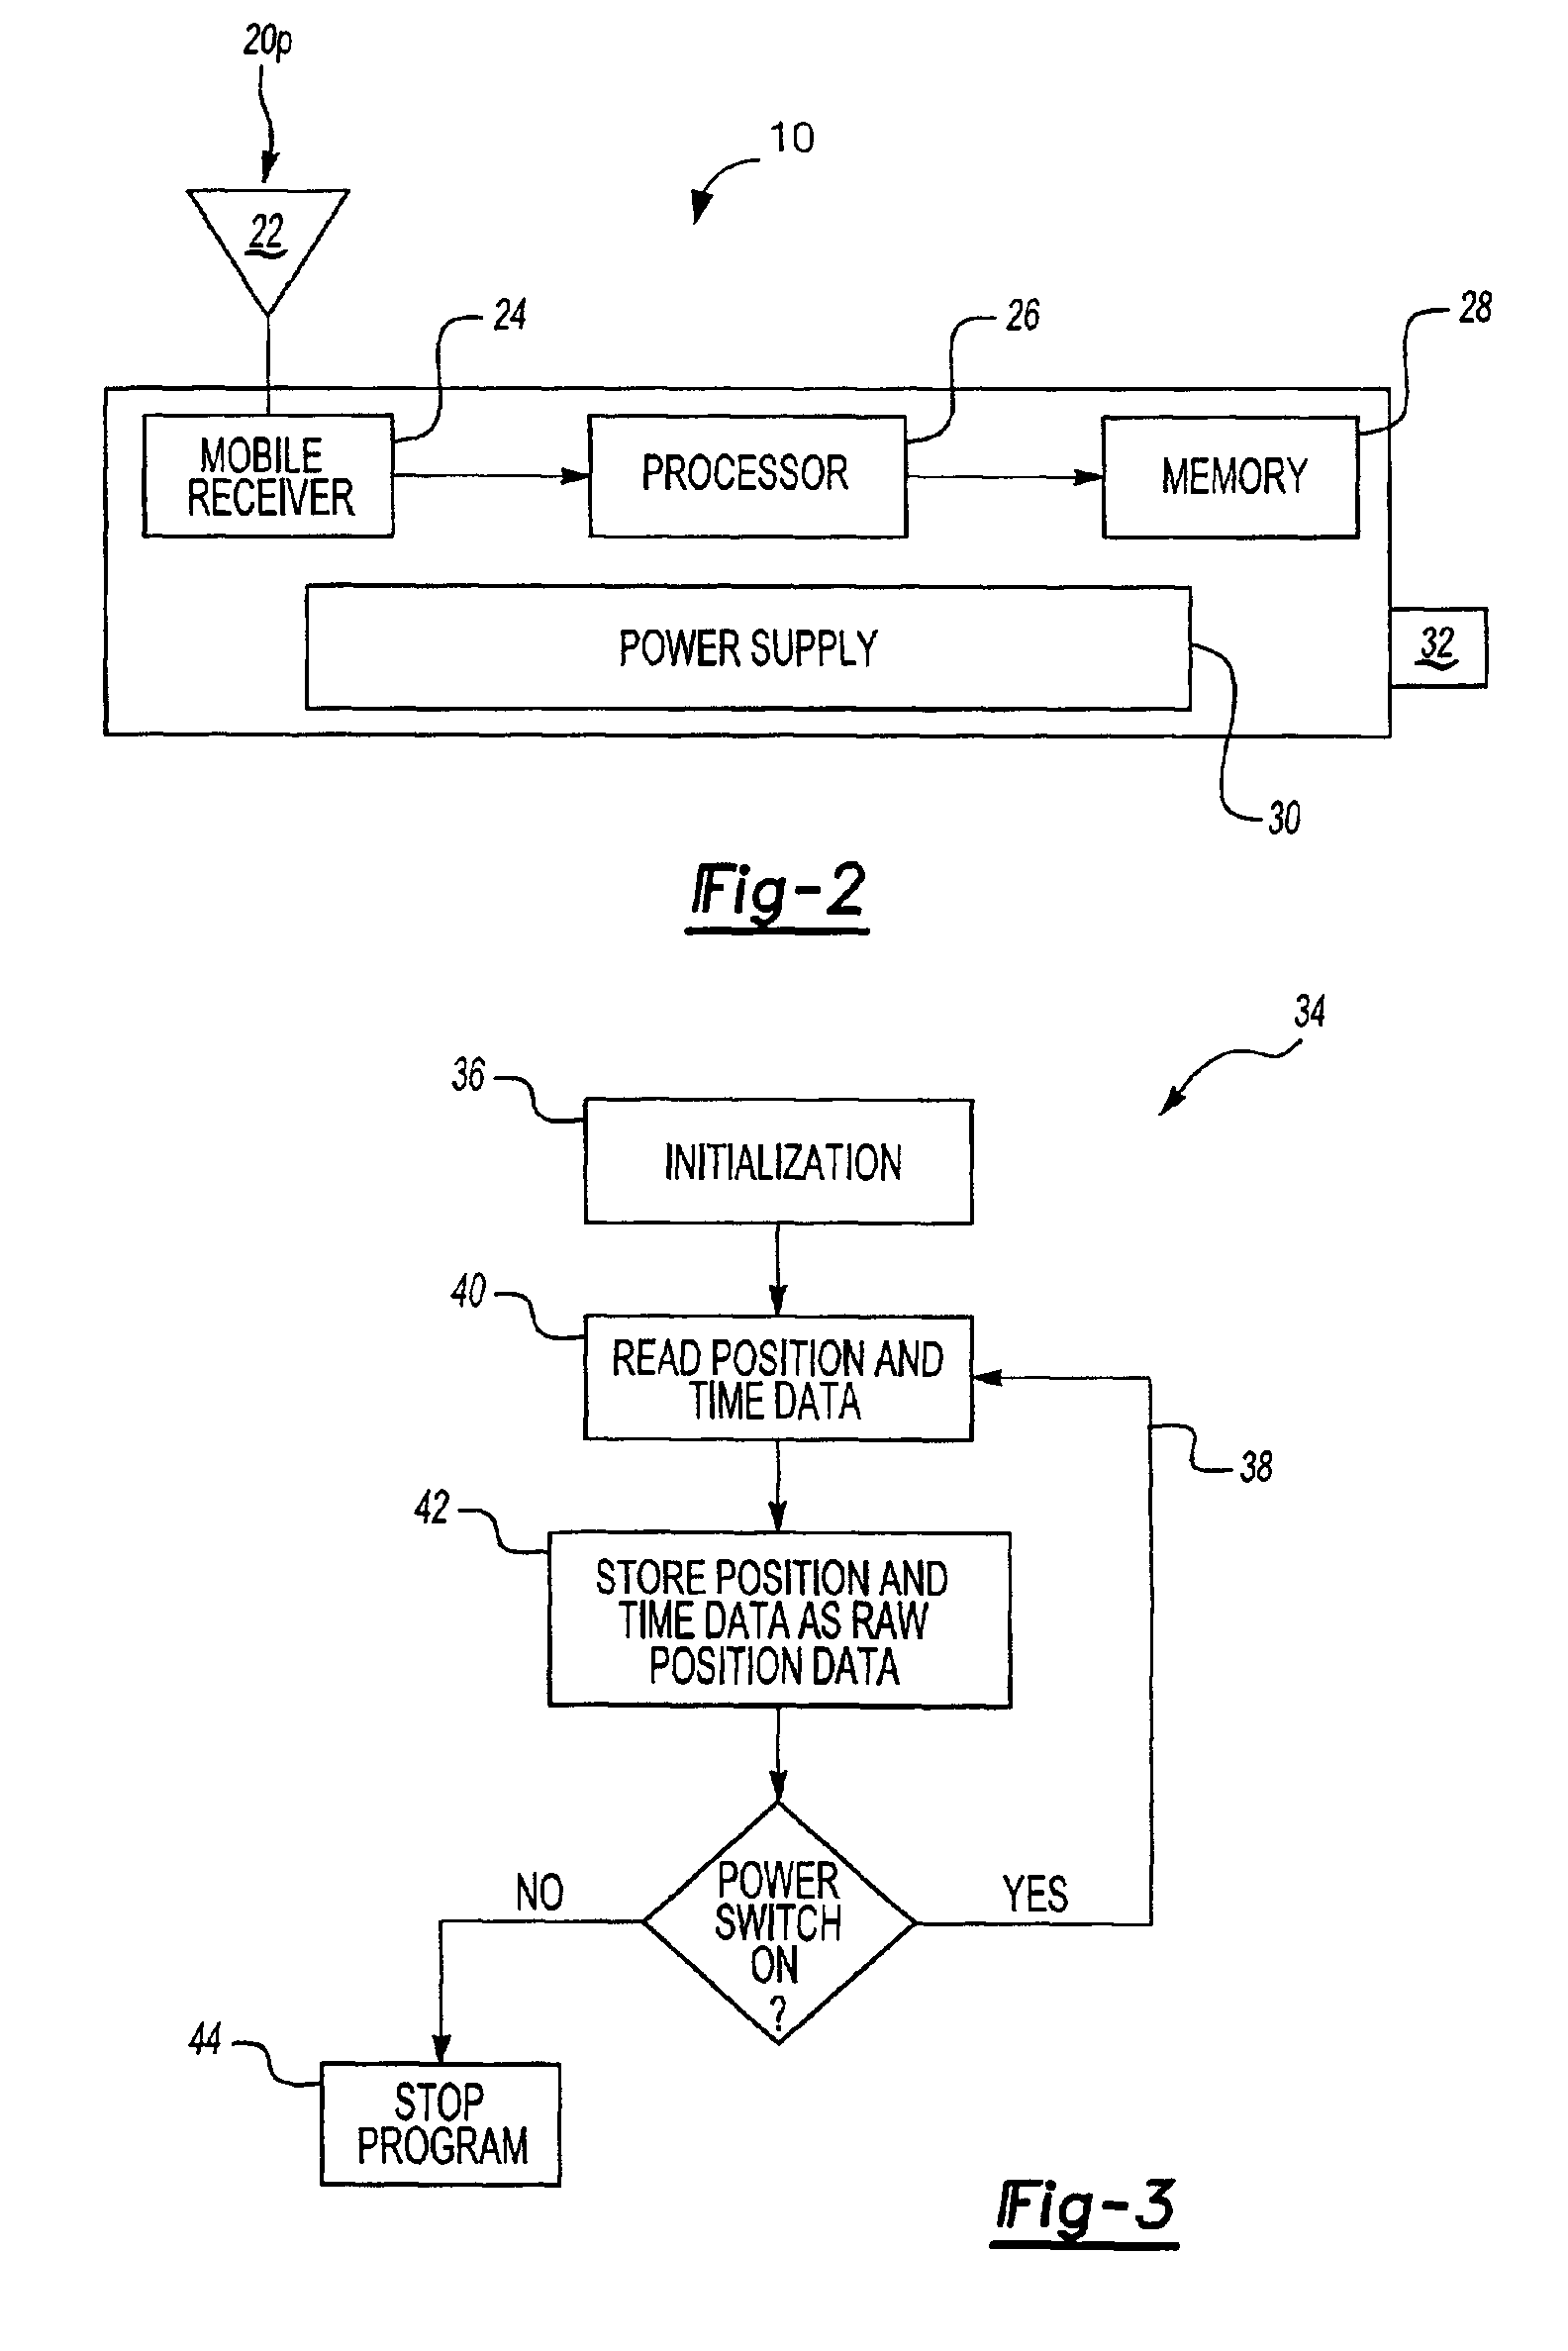 Method and apparatus for recording and synthesizing position data